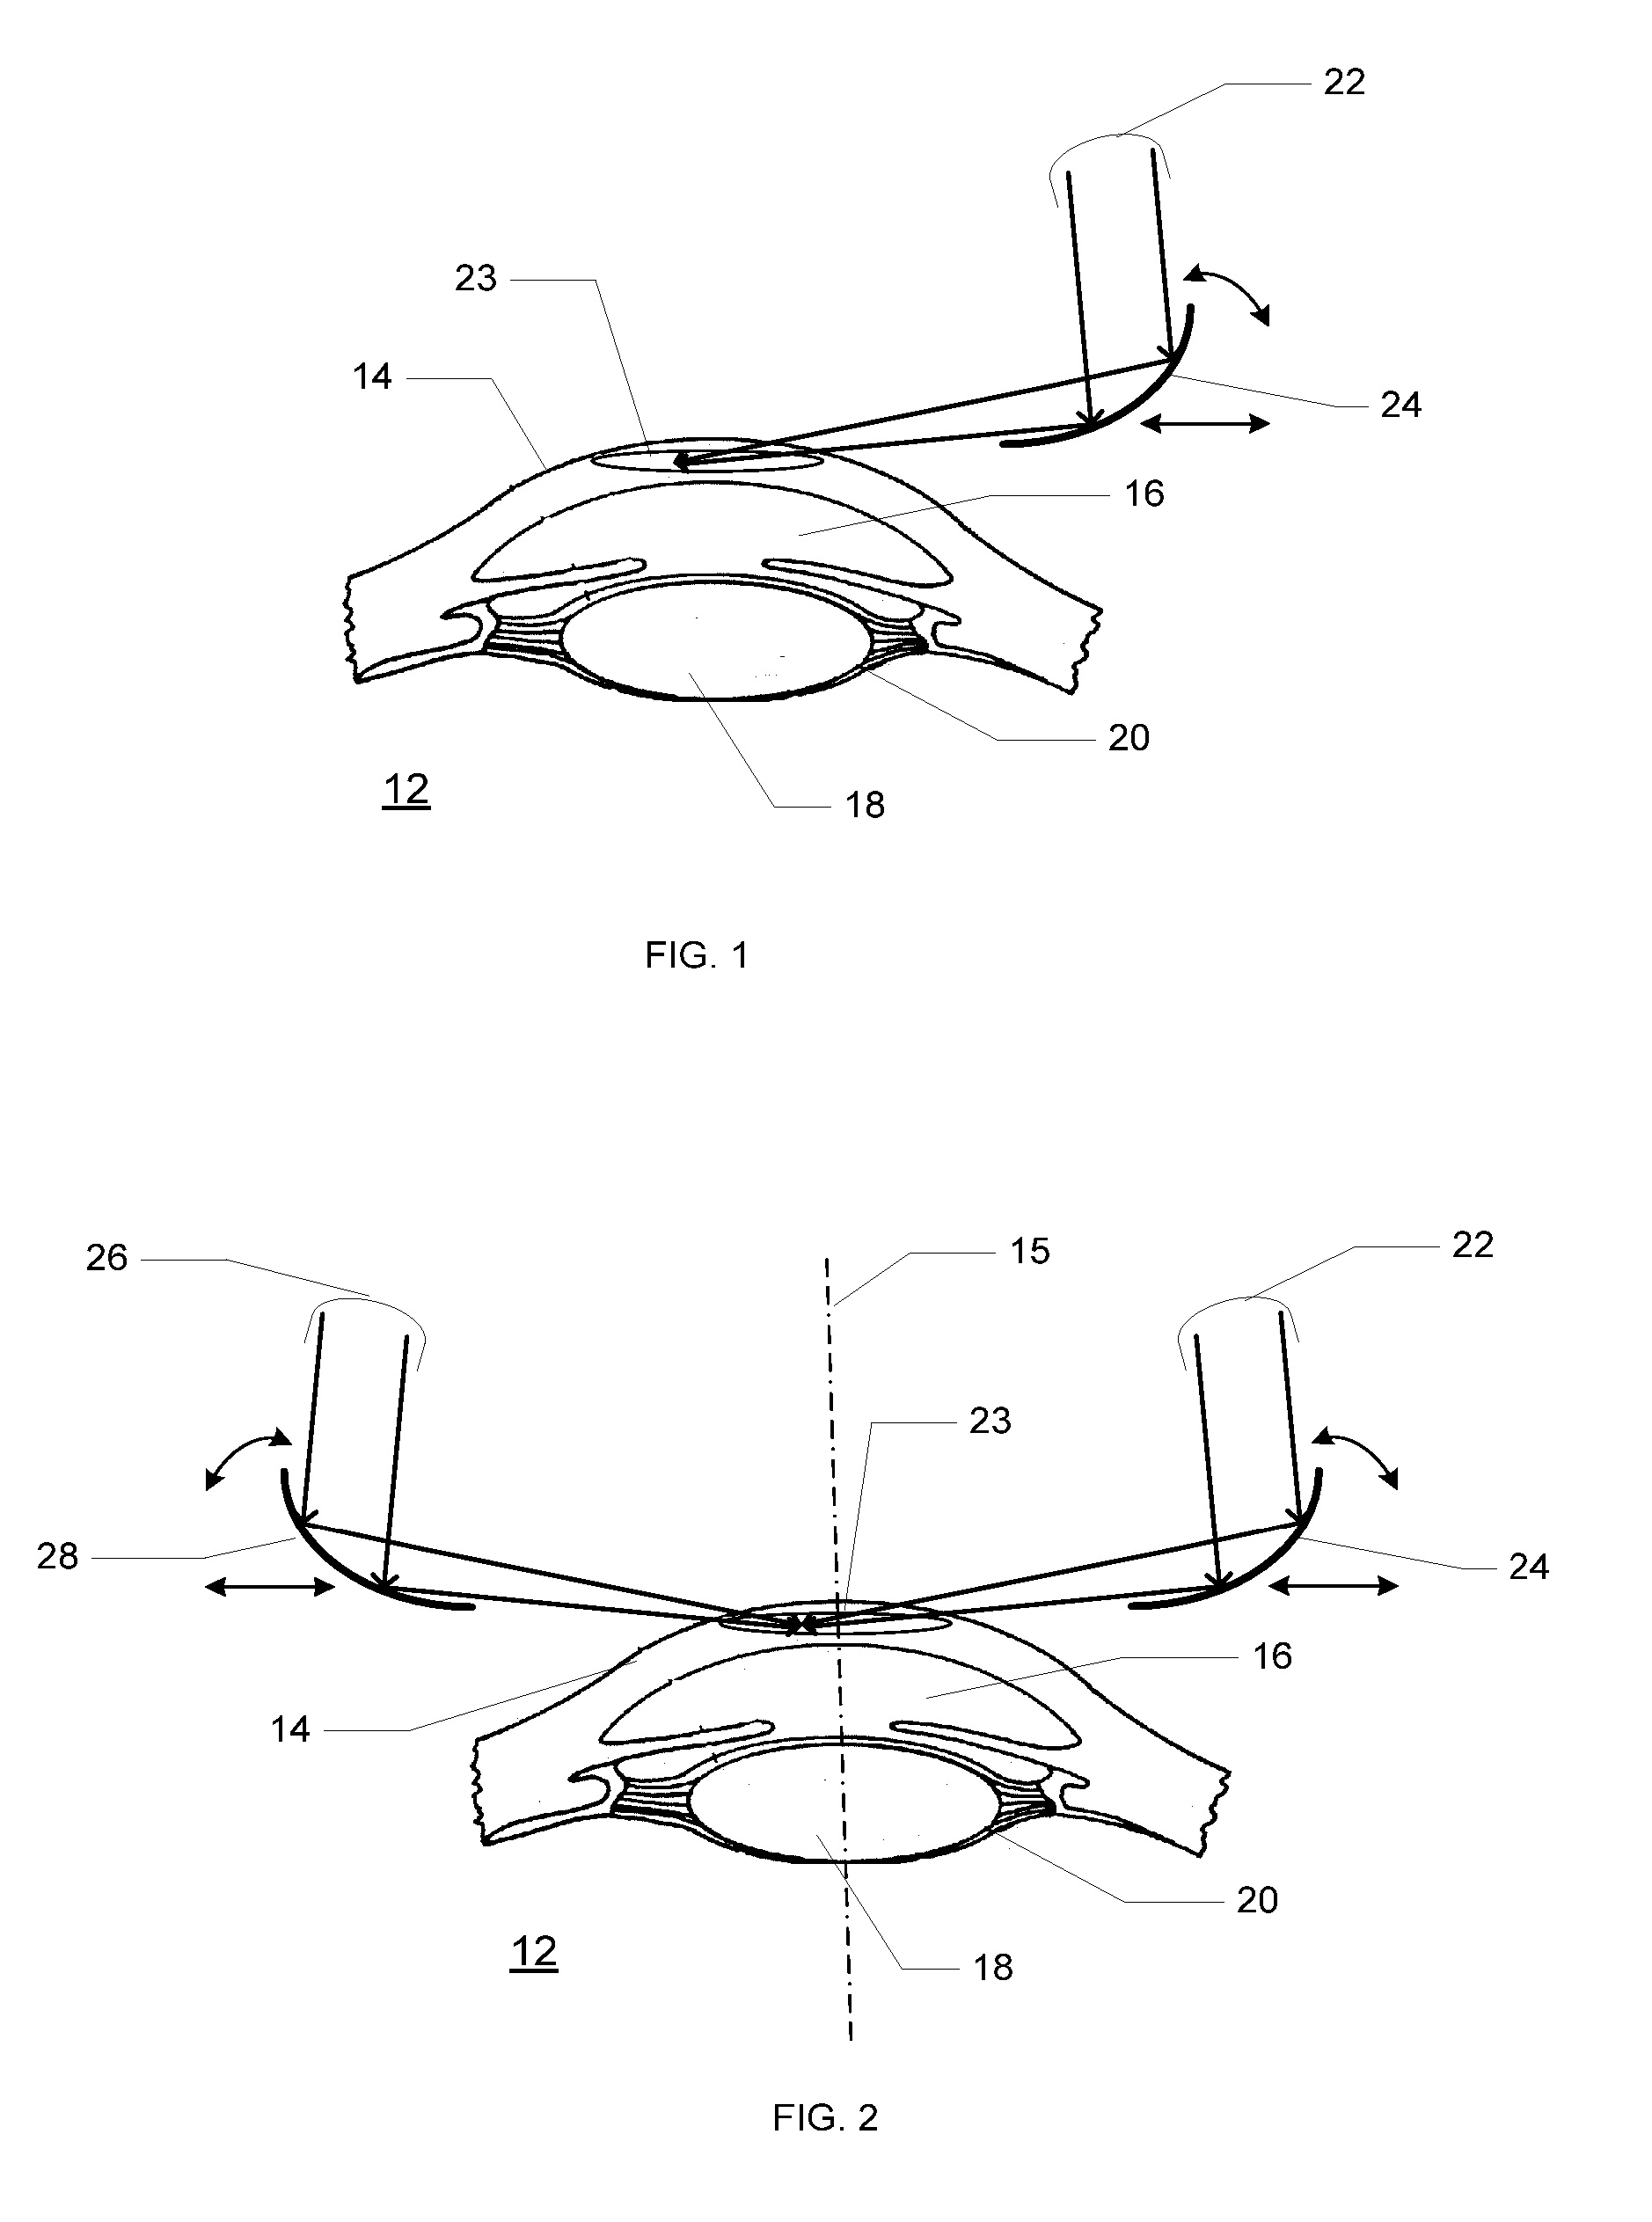 Method and Device for Cornea Reshaping by Intrastromal Tissue Removal